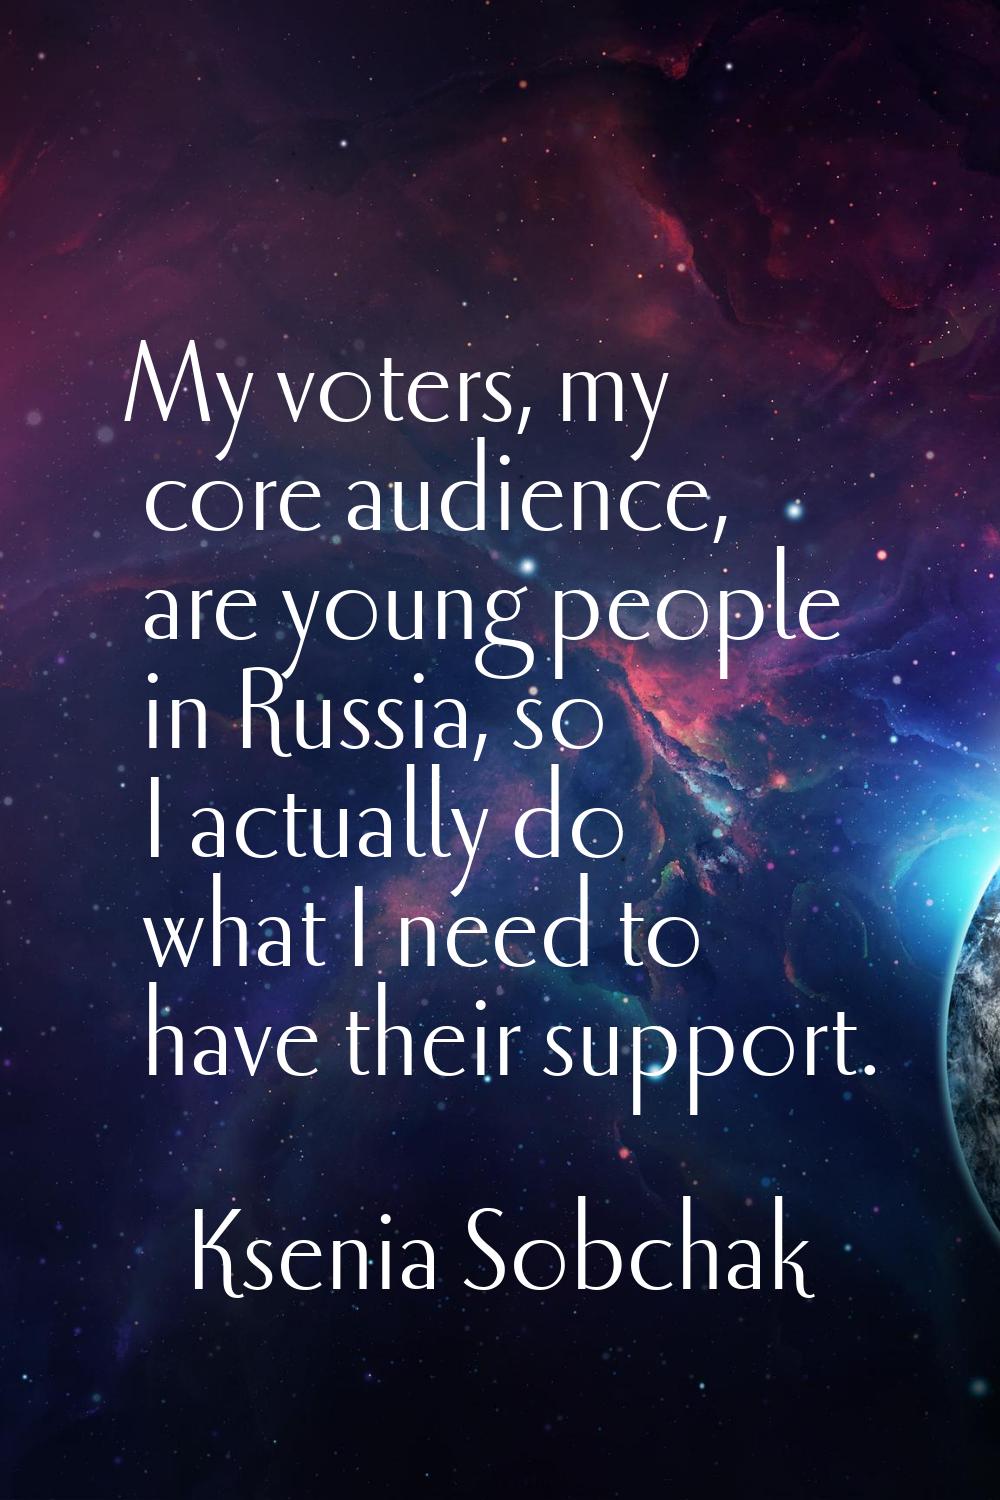 My voters, my core audience, are young people in Russia, so I actually do what I need to have their